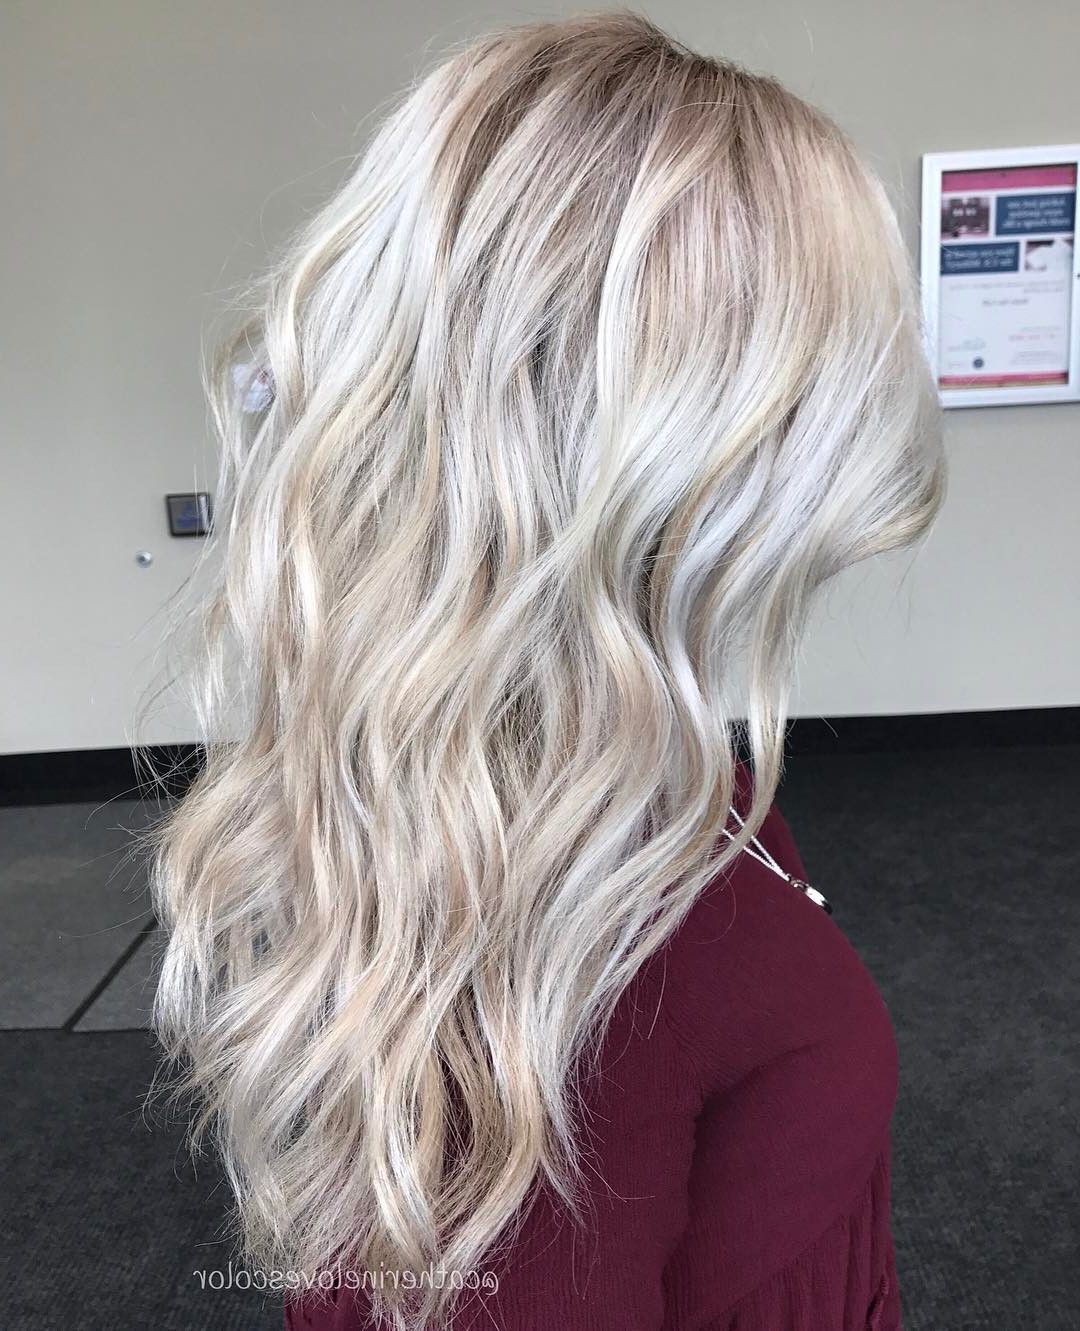 20 Adorable Ash Blonde Hairstyles To Try: Hair Color Ideas 2018 Throughout Dark Blonde Short Curly Hairstyles (Photo 20 of 25)